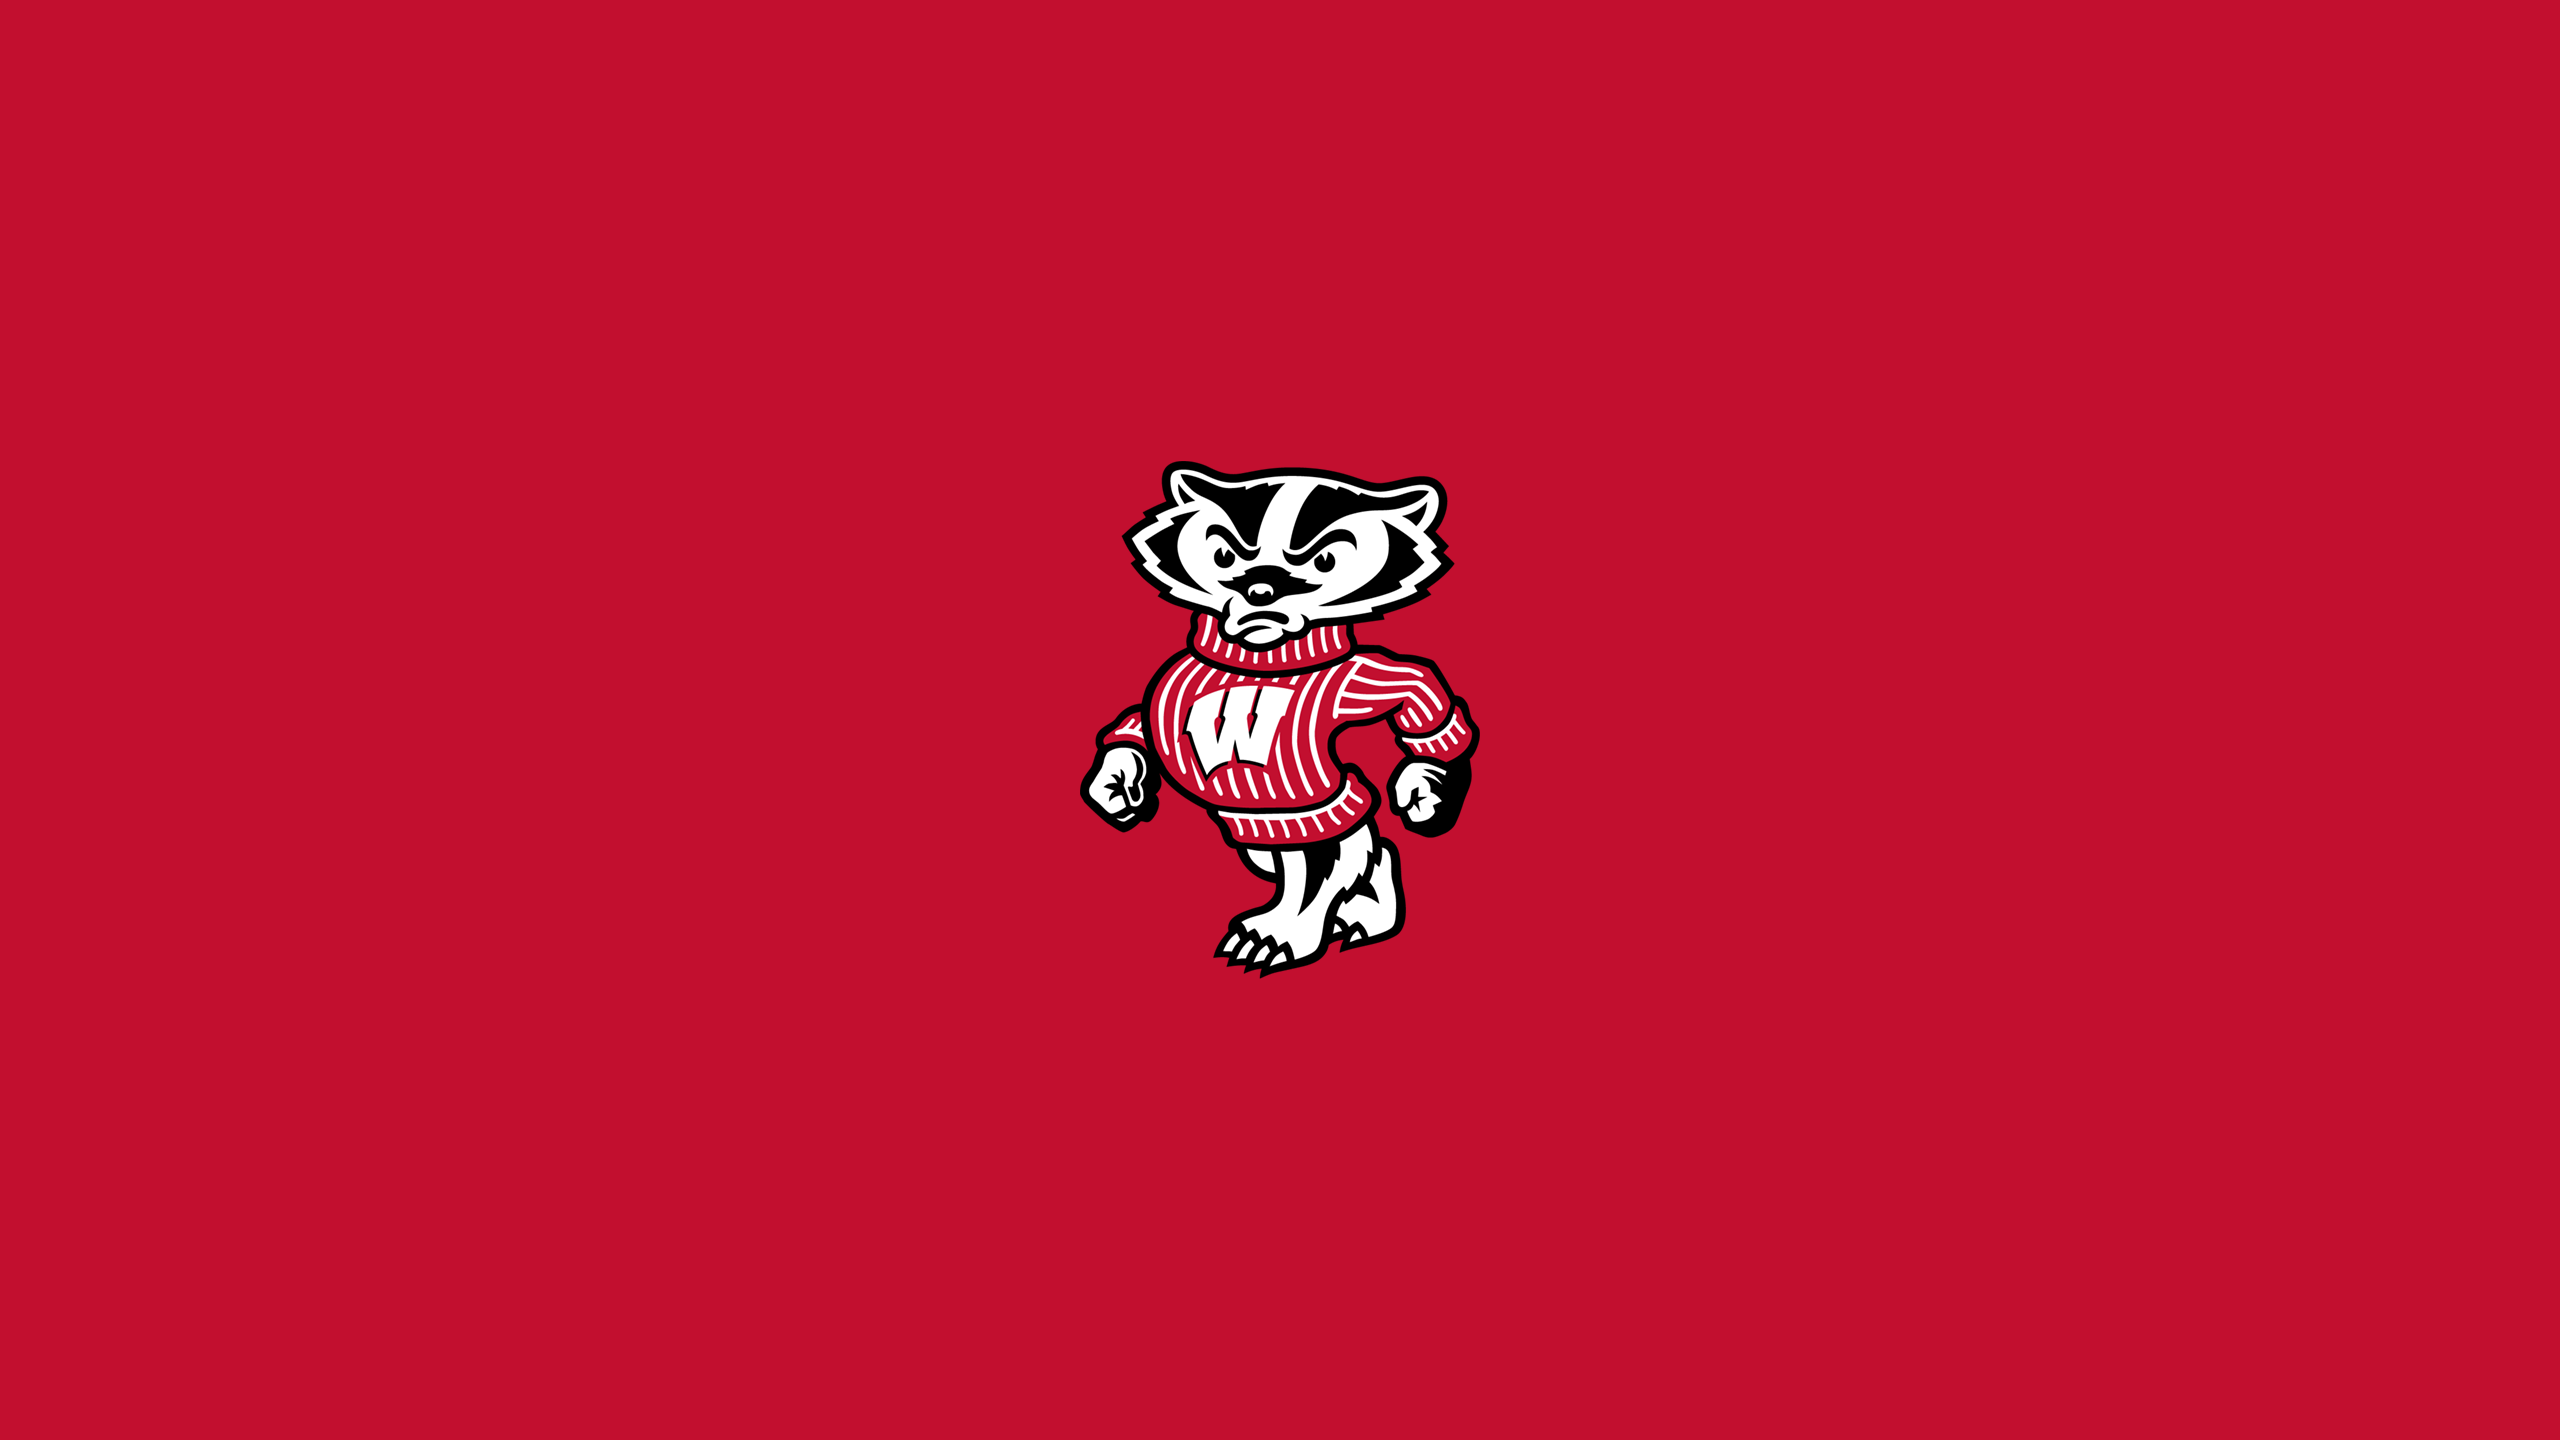 Wisconsin Badgers Basketball - NCAAB - Square Bettor